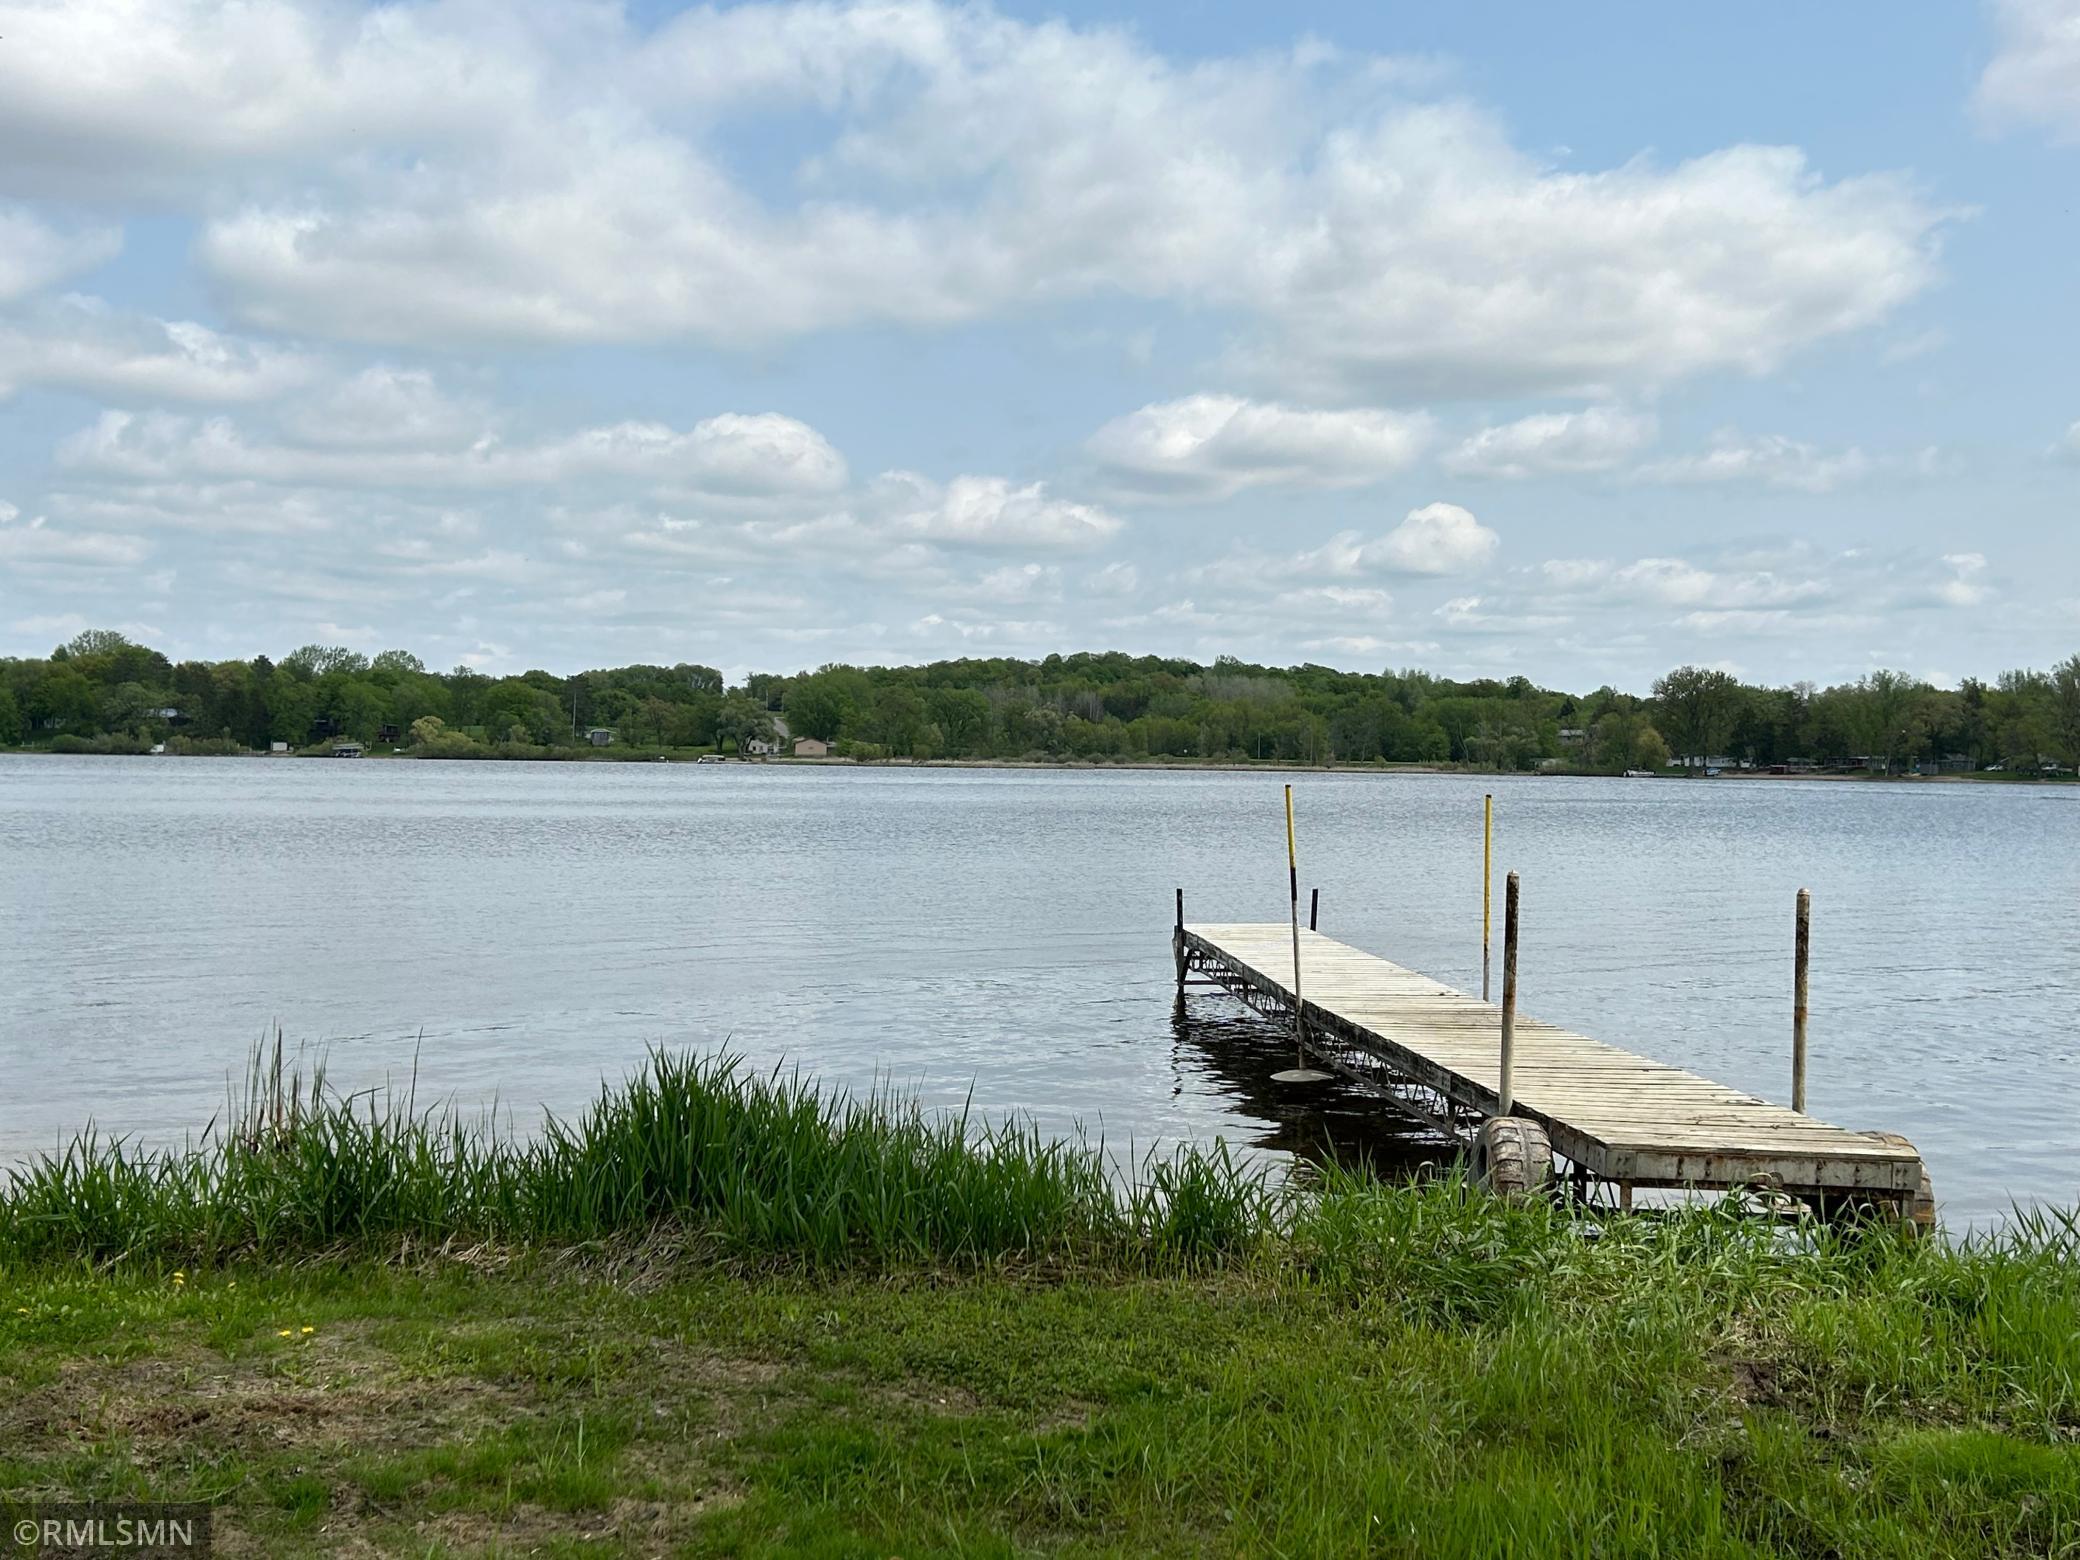 Spend time fishing or swimming on the shared dock. Set out your lawn chair and catch some rays or have a picnic lakeside.